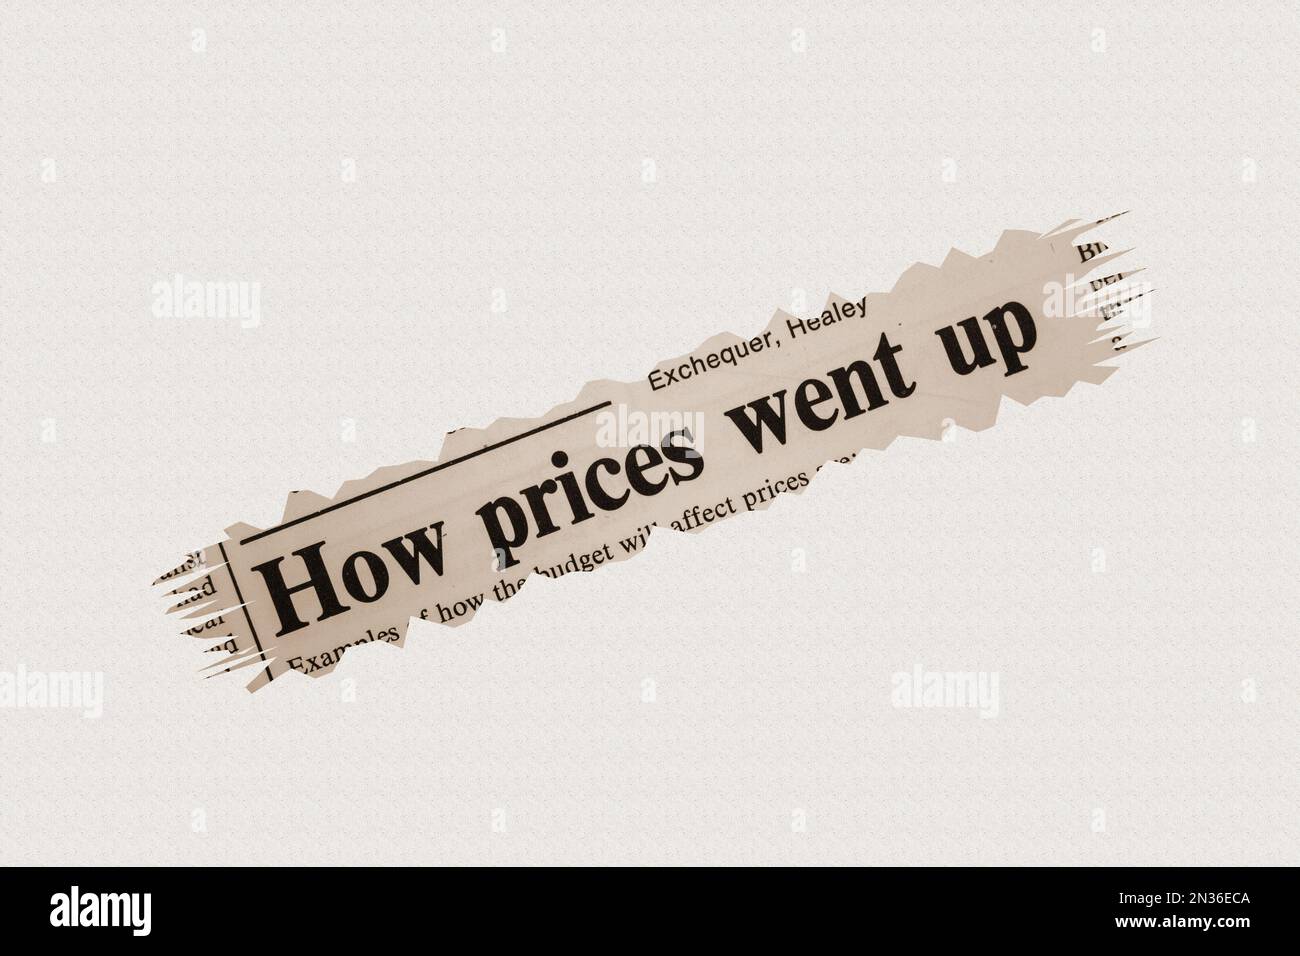 How prices went up - news story from 1975 newspaper headline article title in sepia Stock Photo